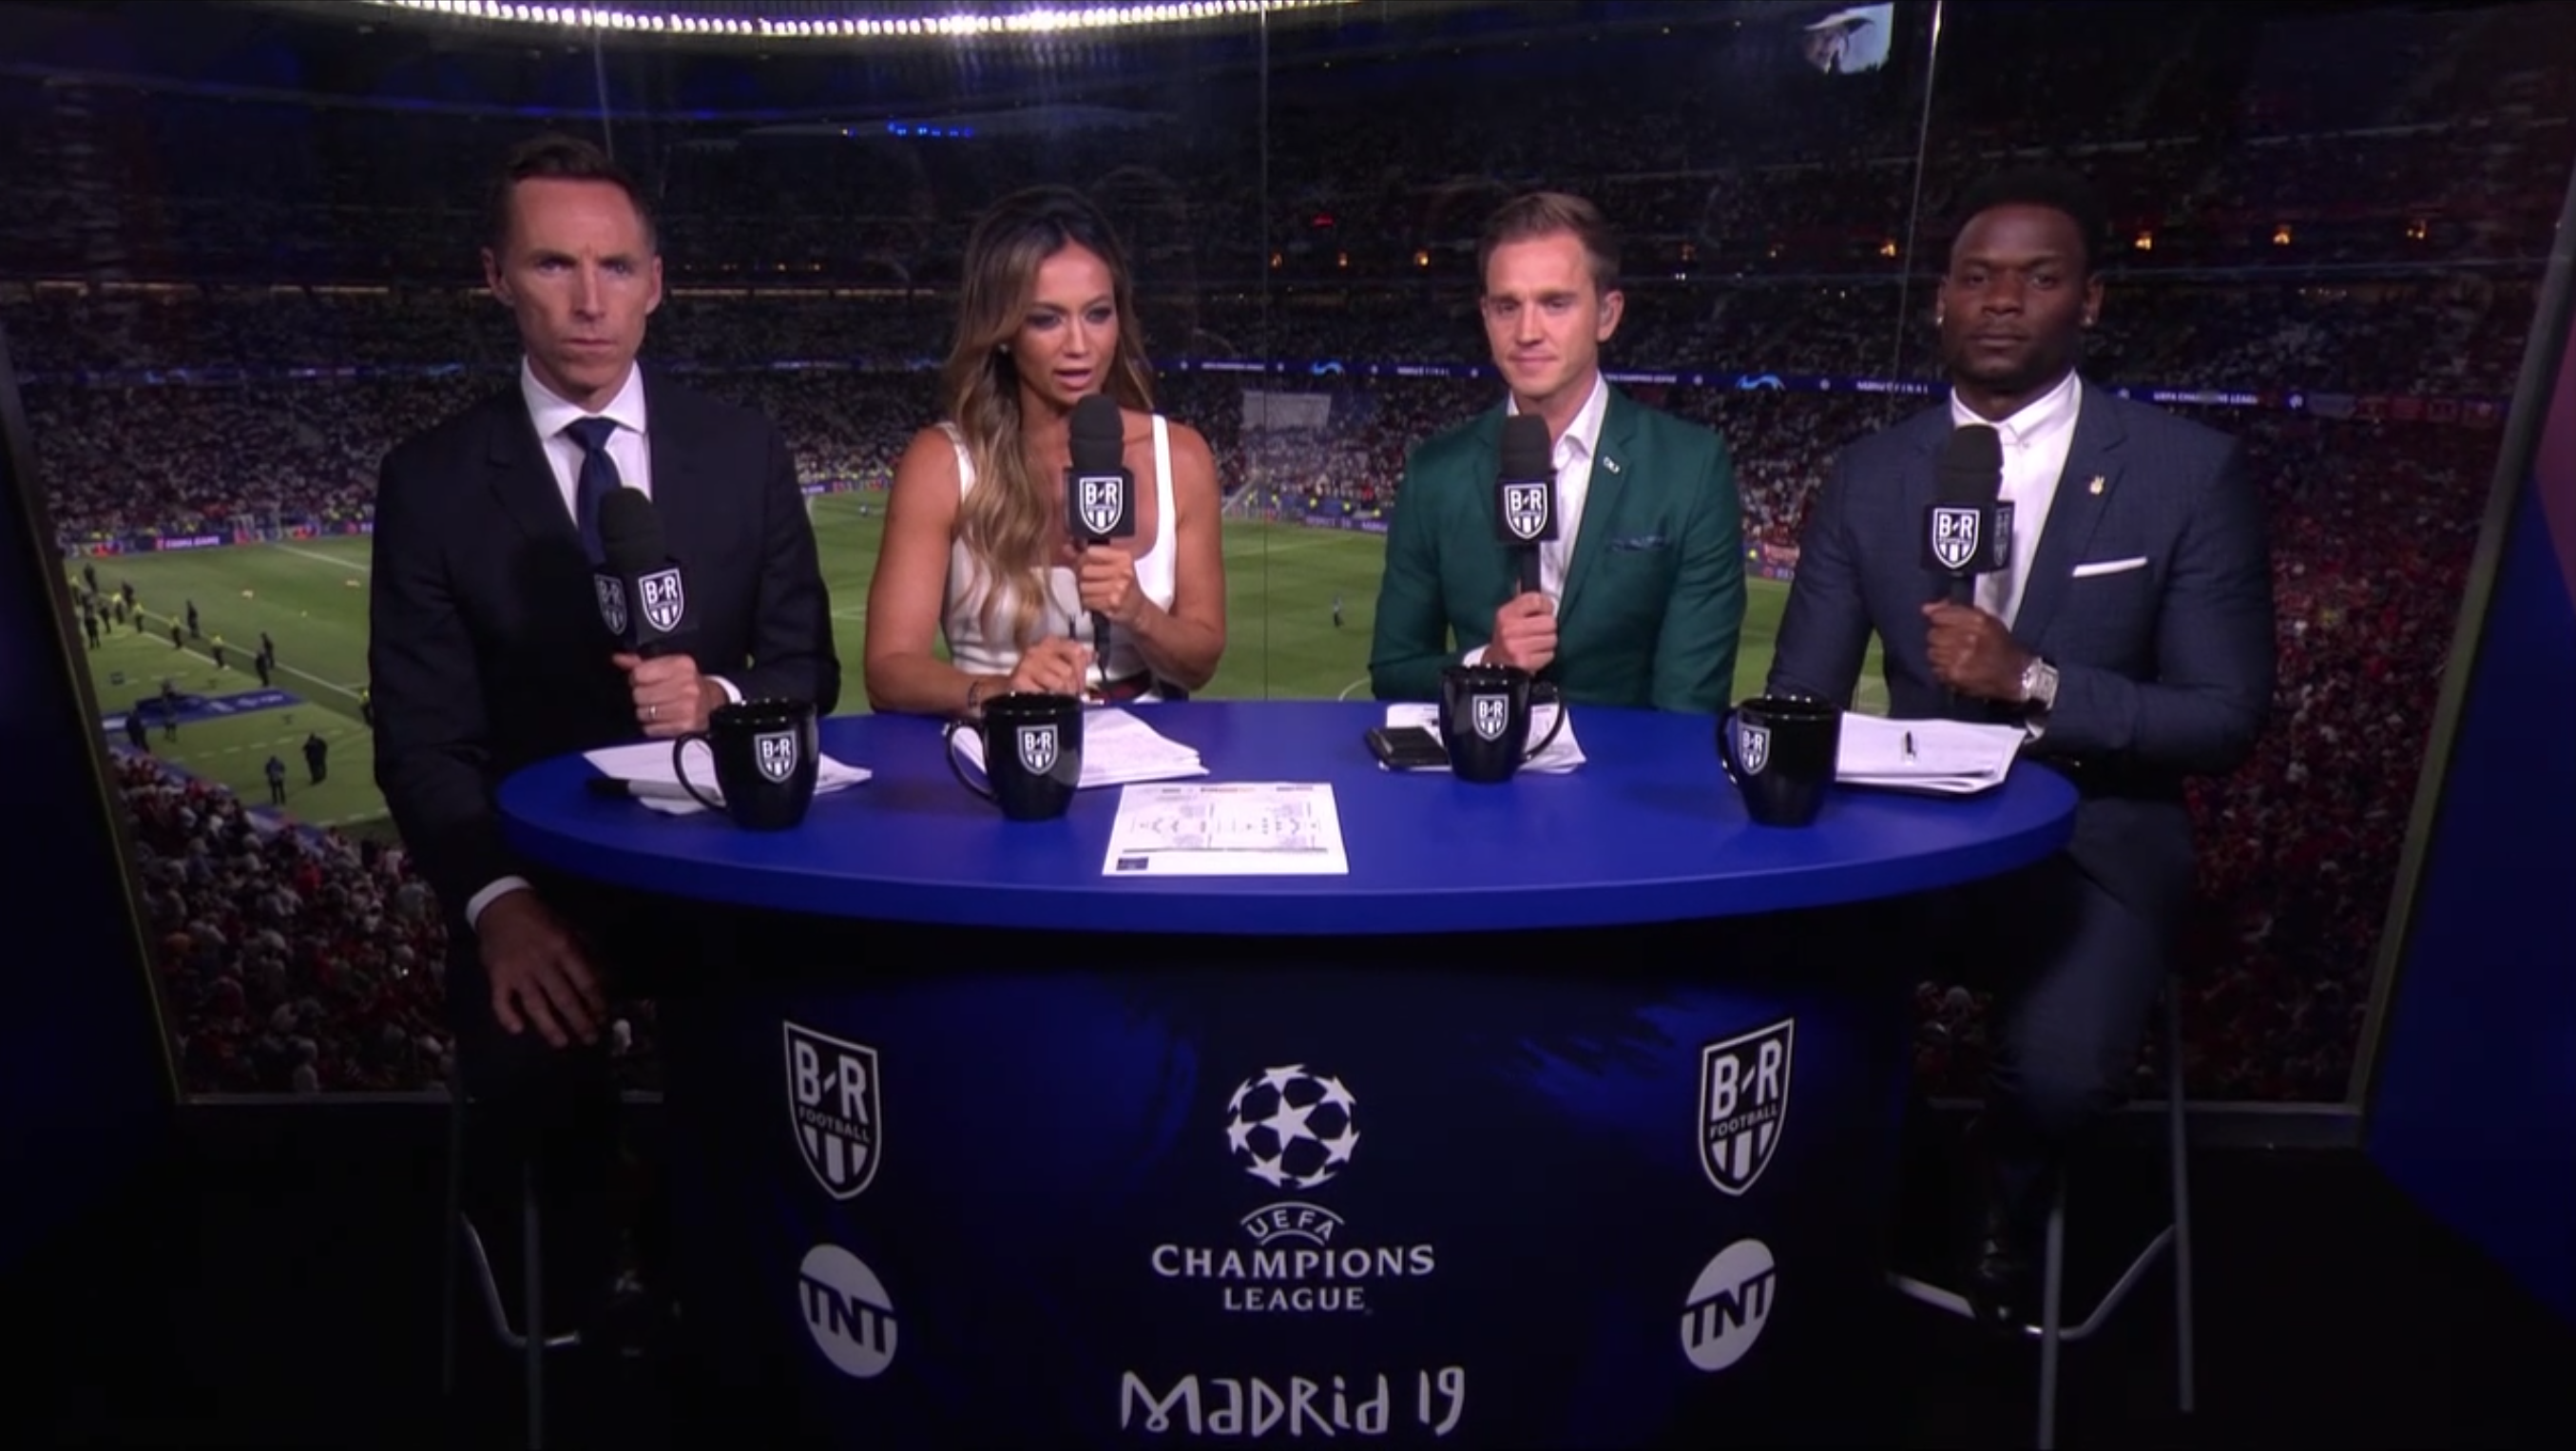 Tnt Confuses Itself And Us Over Ucl Final Announcers